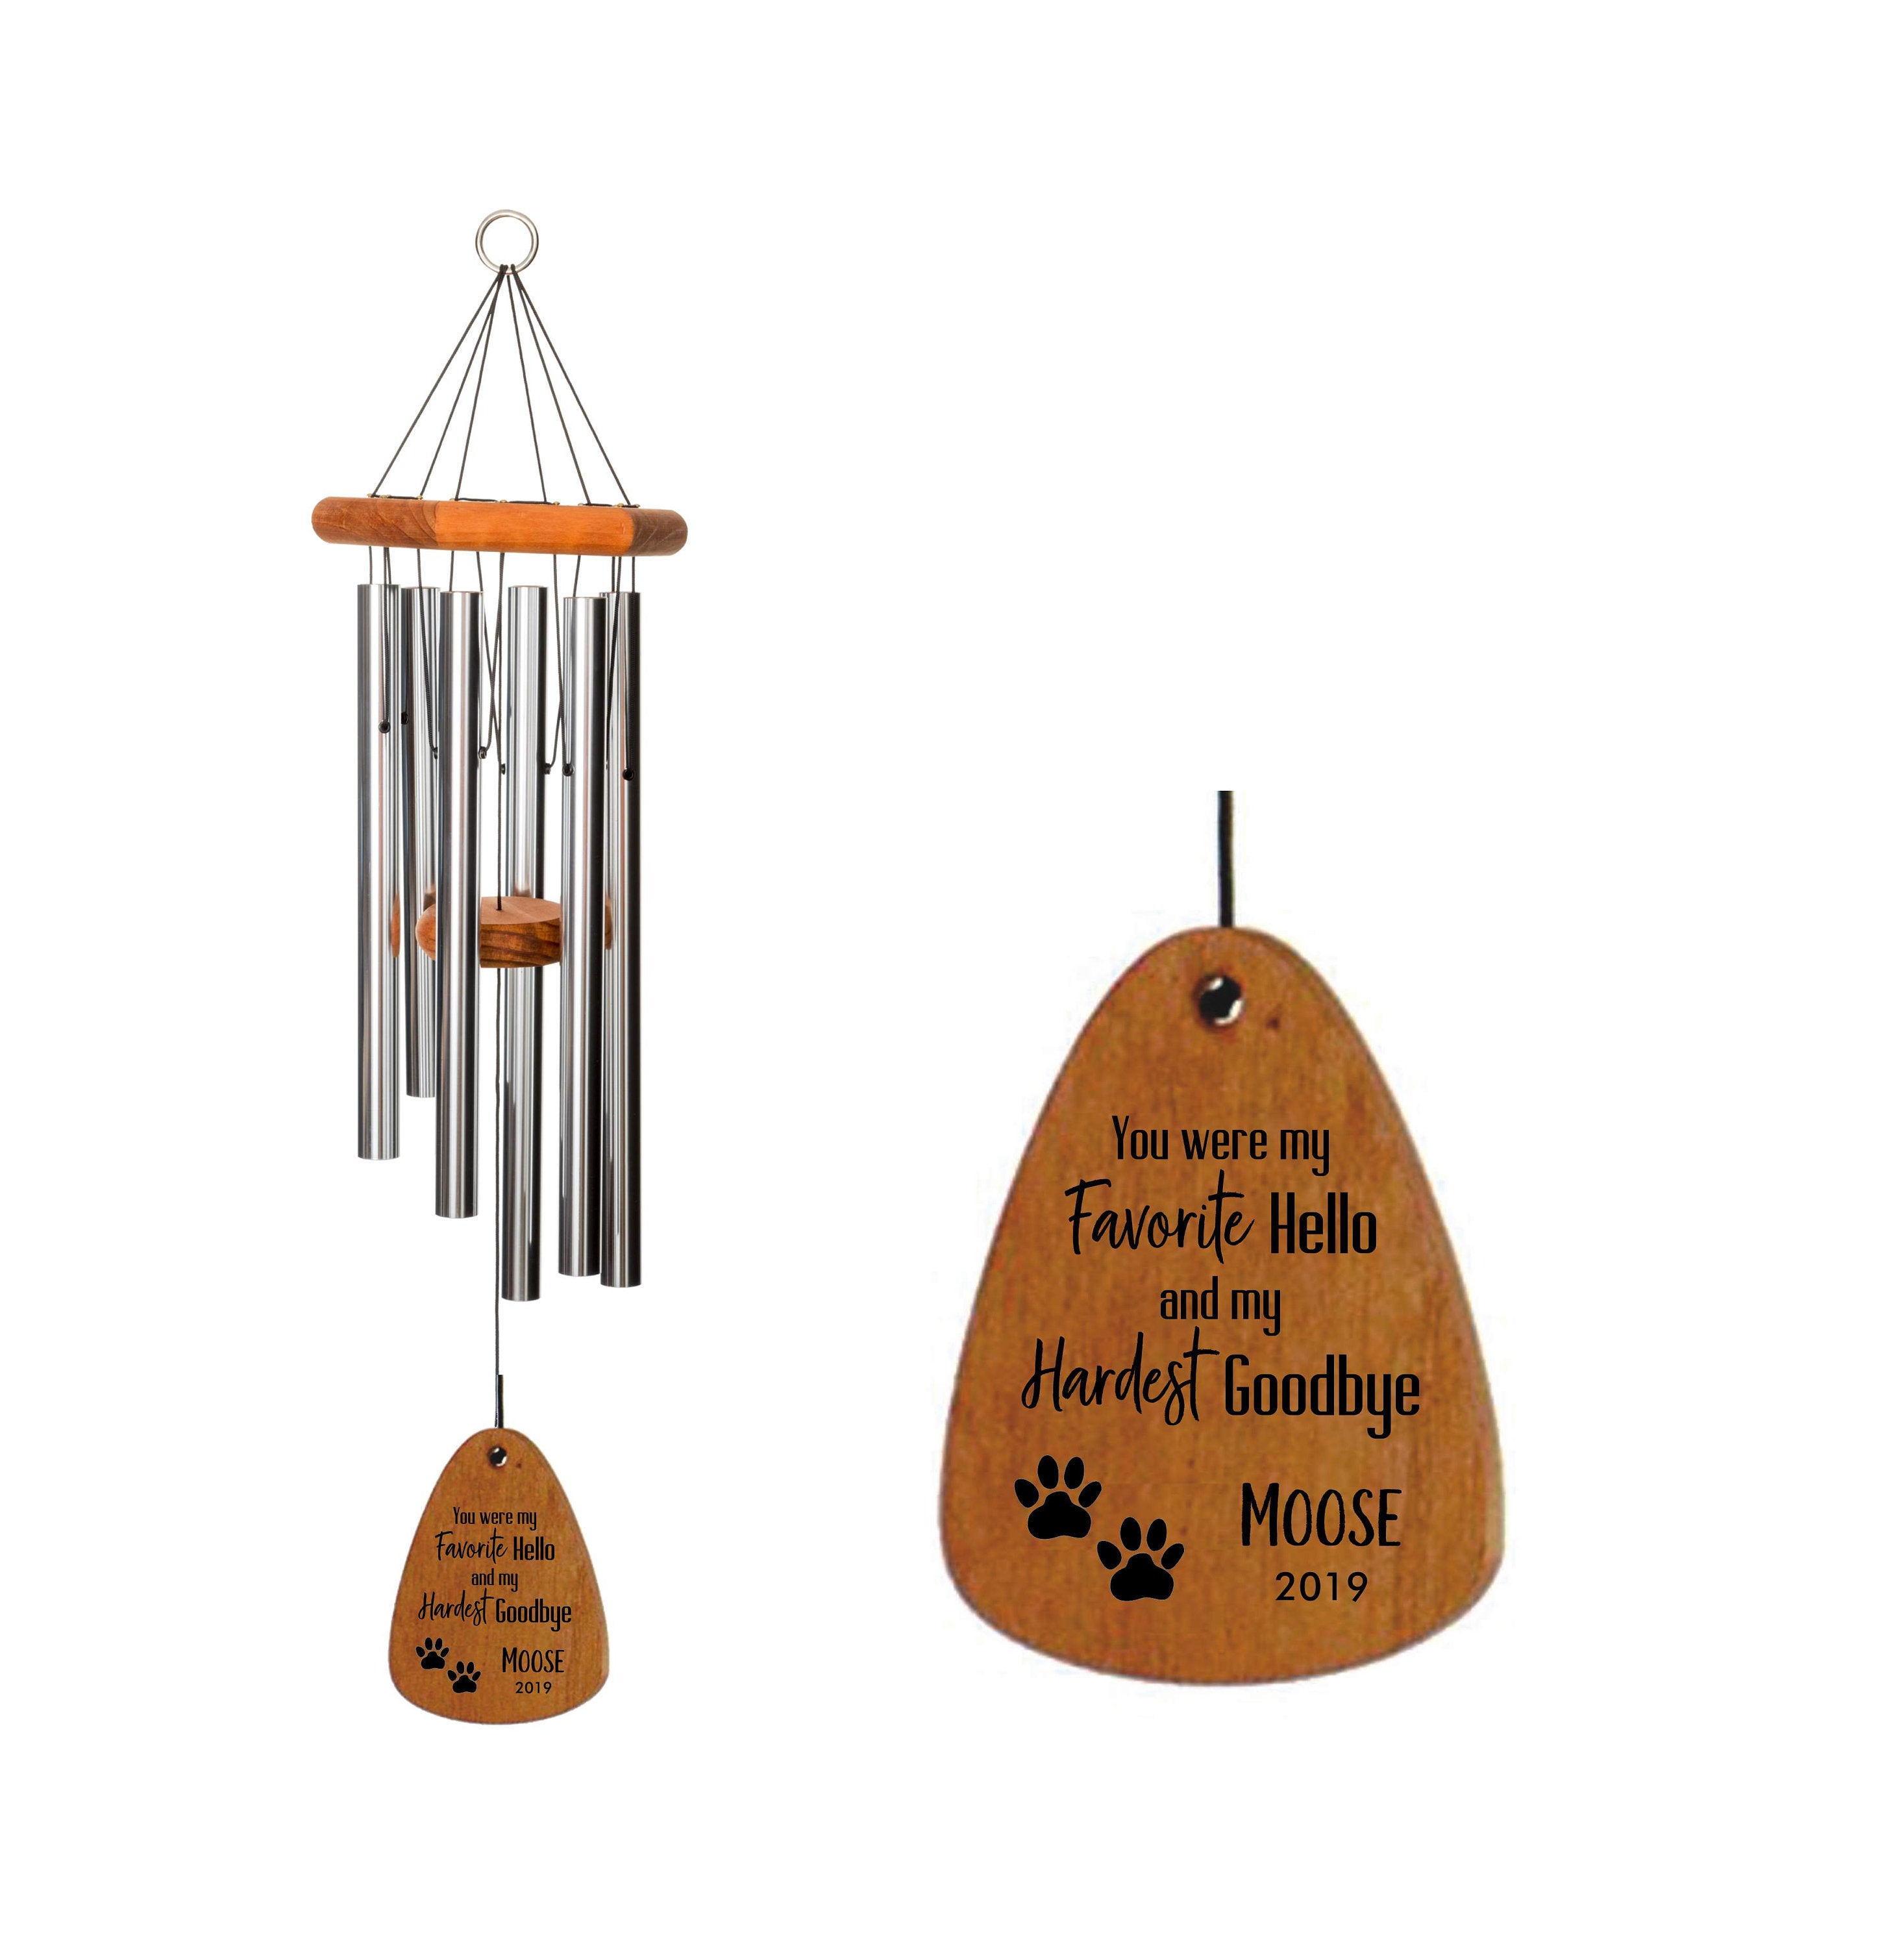 Loss of Dog Memorial Wind Chime 18-Inch Silver, Favorite Hello Hardest Goodbye, Loss of Dog Memorial Gift, Loss of Dog, Pet Memorial